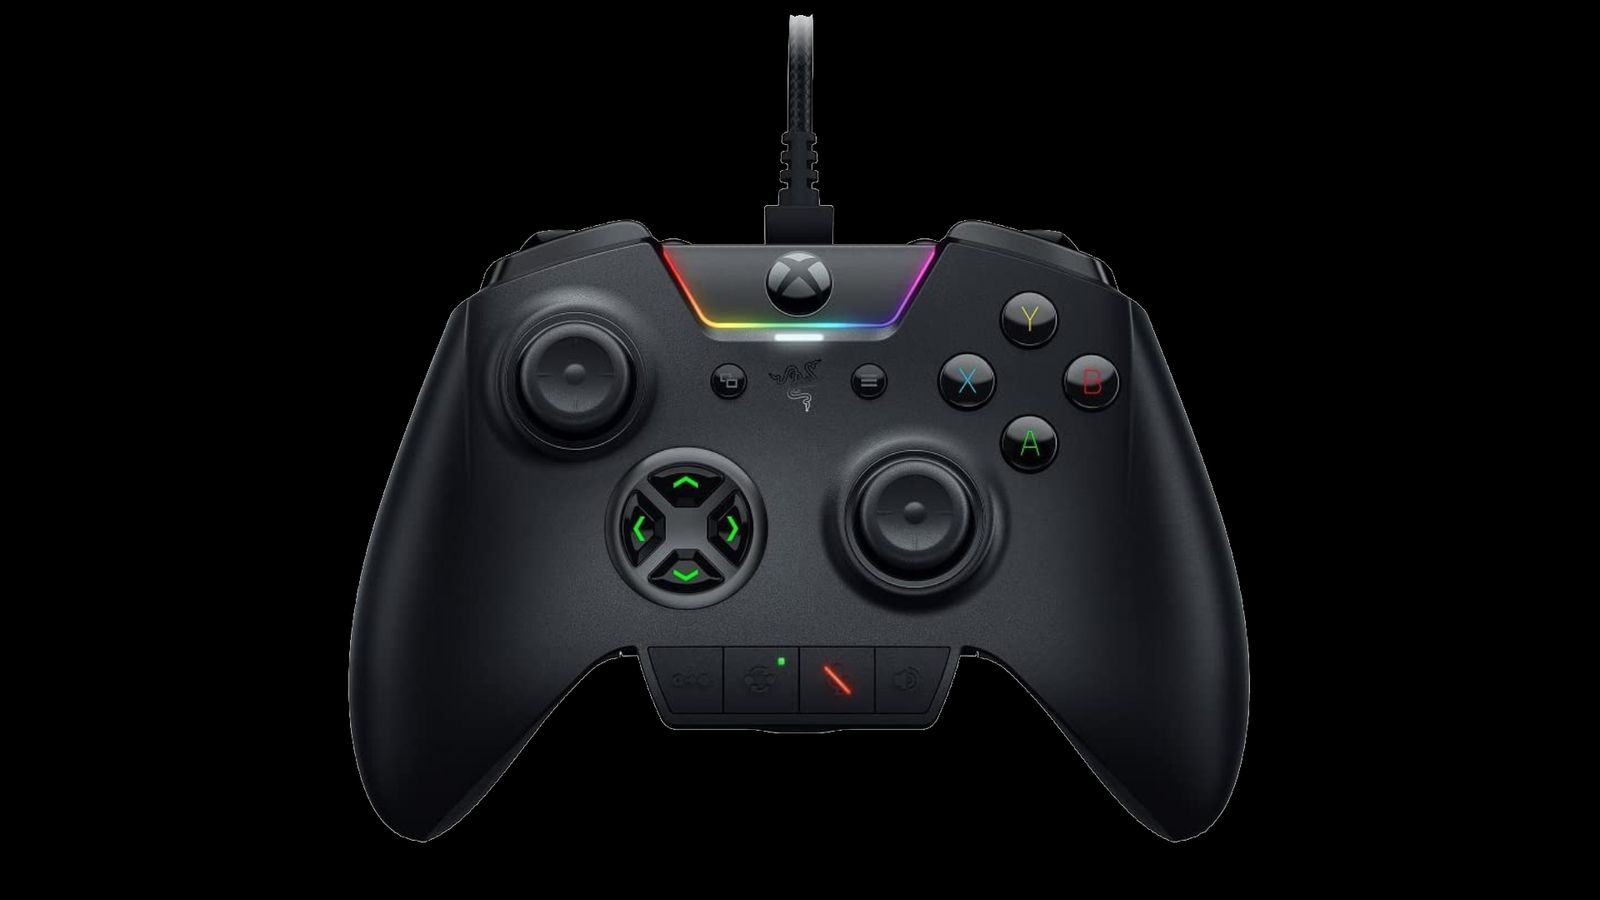 Razer Wolverine Ultimate product image of a black, Xbox-style, wired gamepad featuring RGB lighting.